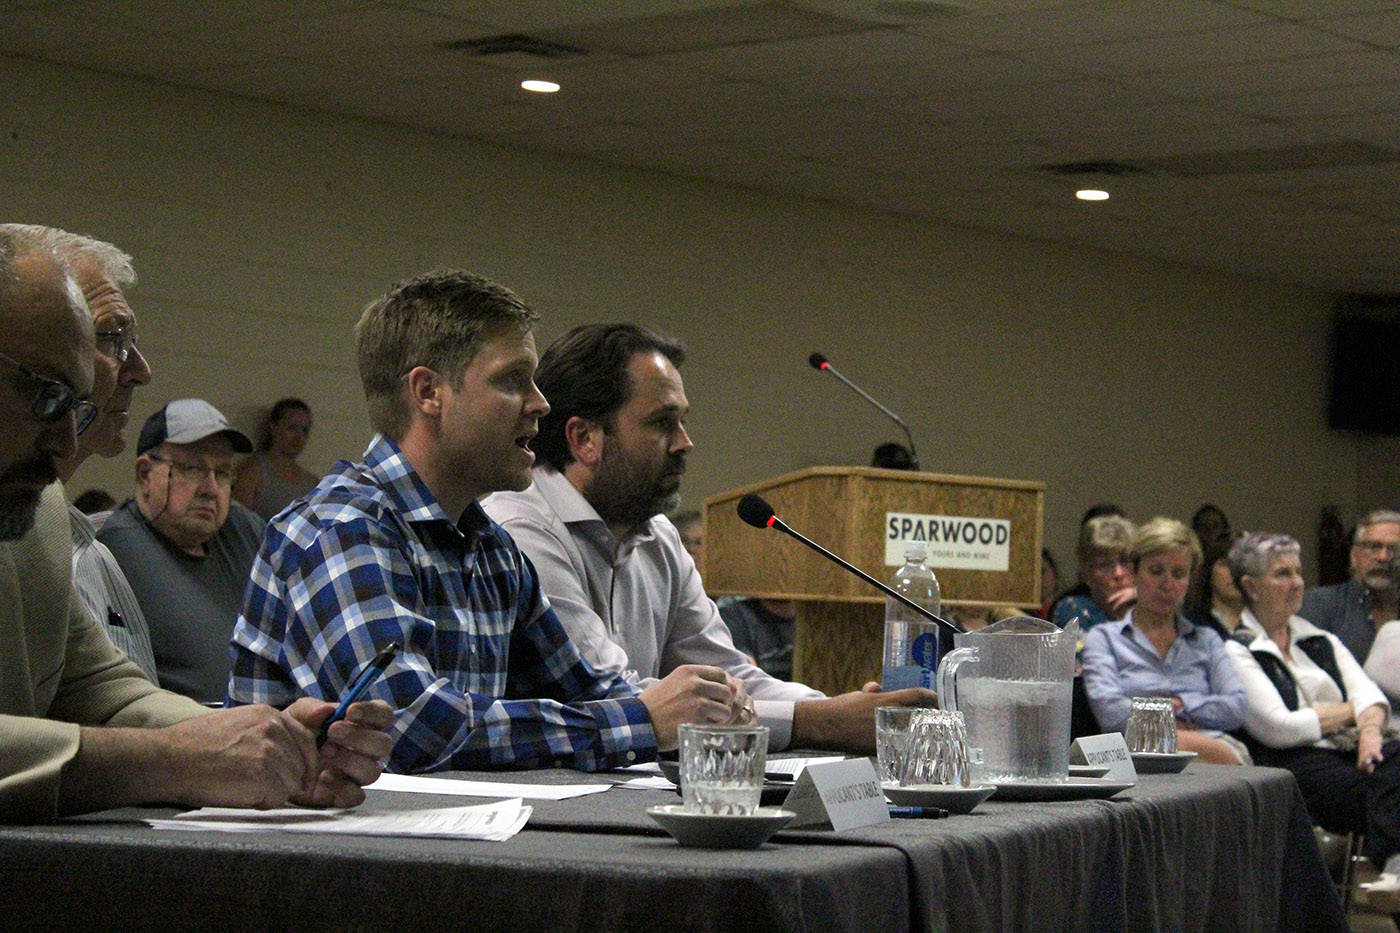 17203335_web1_Sparwood-temporary-worker-camp-public-hearing-3